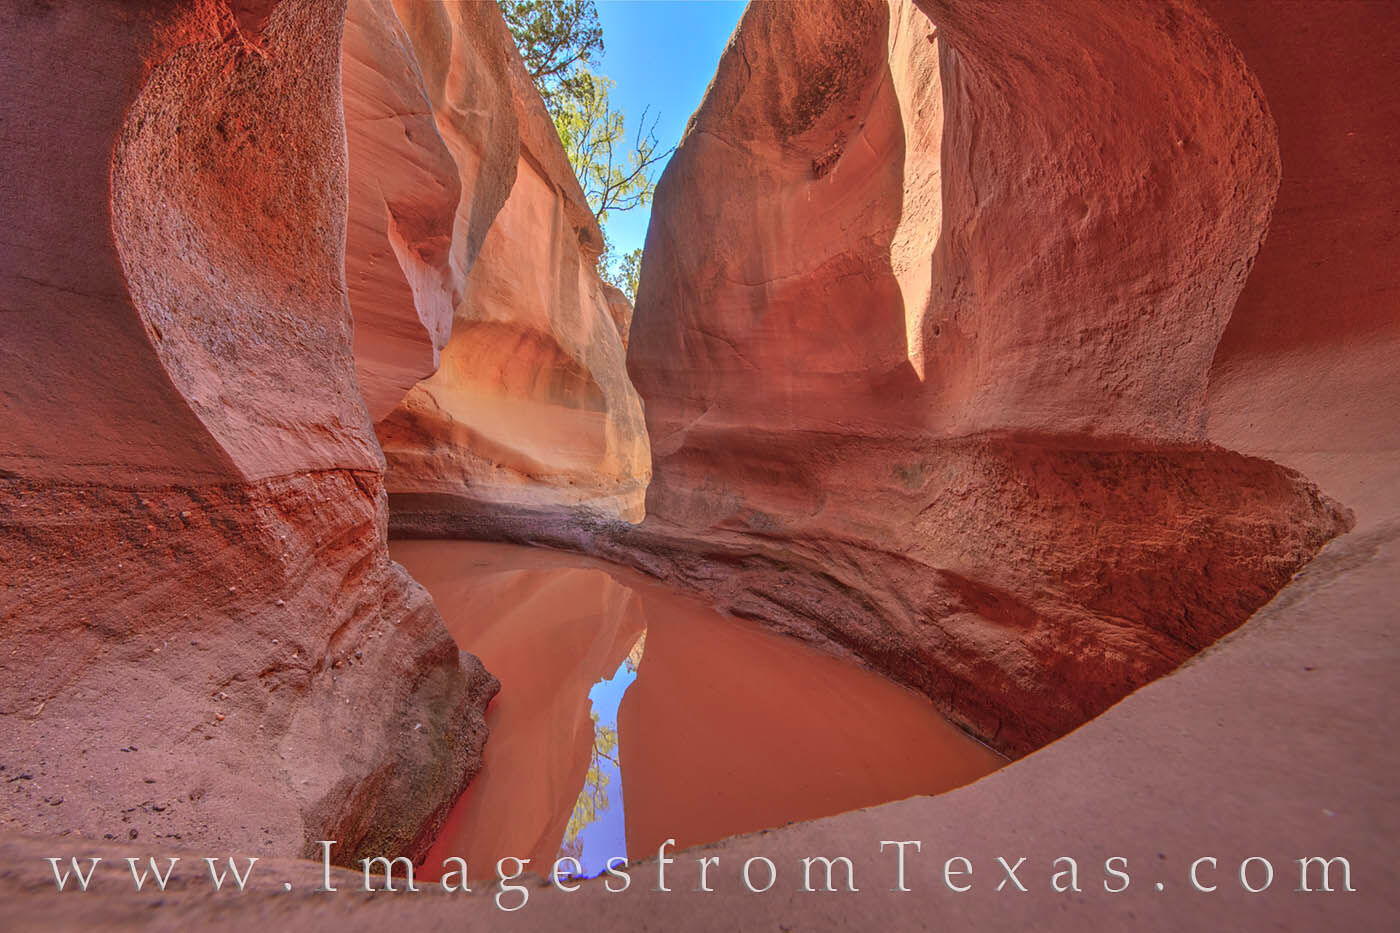 Southwest of Caprock Canyons State Park on a private ranch, a small slot canyon known locally as "The Eye of the Llano" is a...